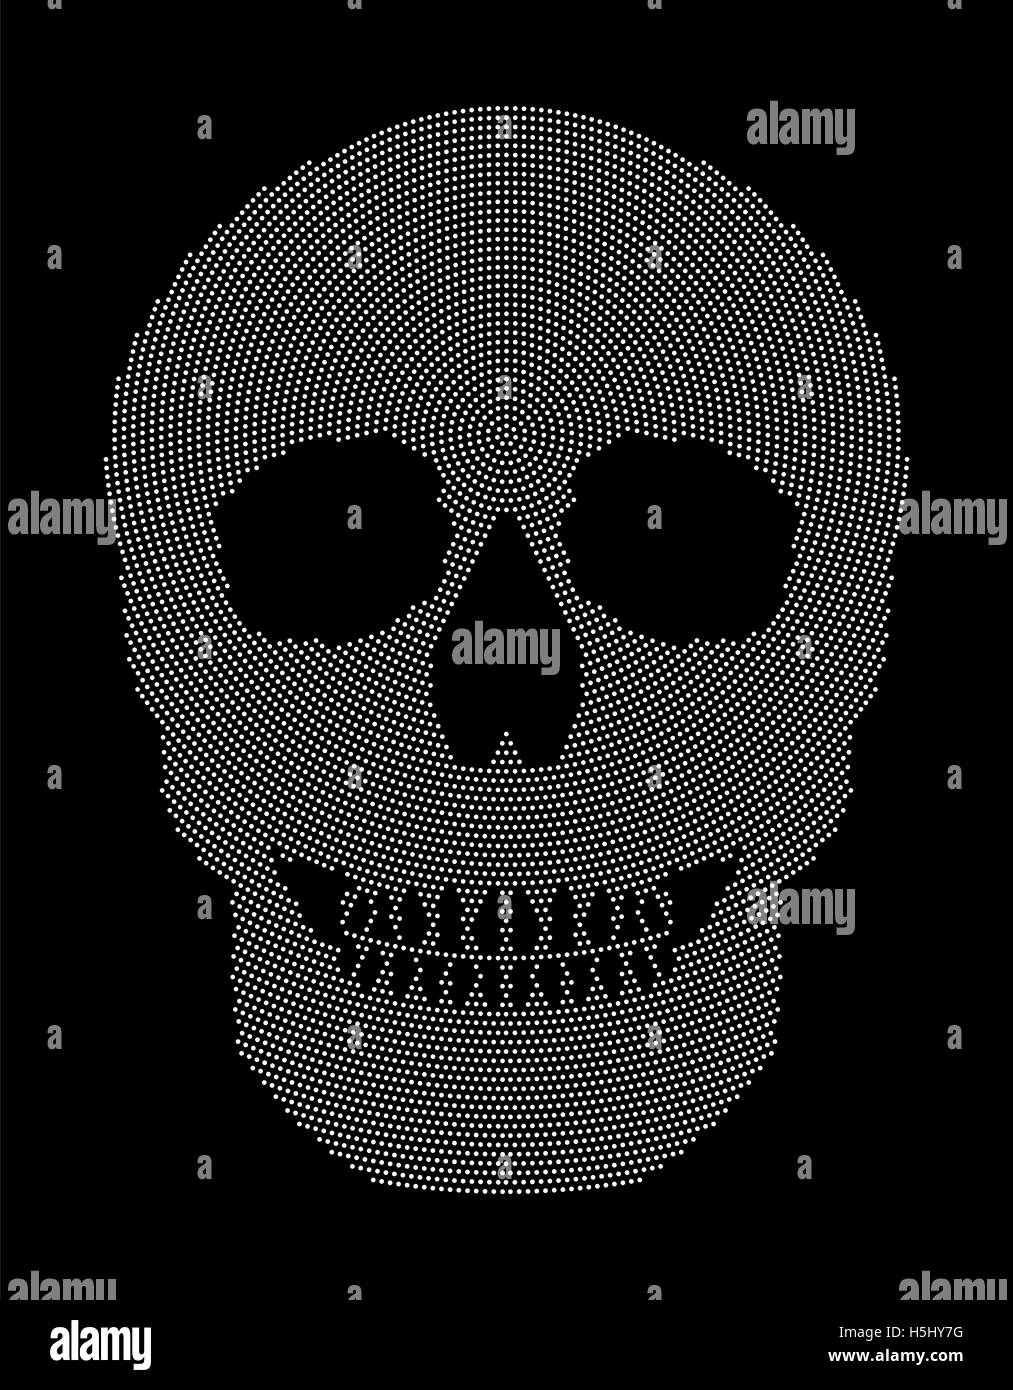 Skull radial dot pattern. Symbol of the bone structure of an head of a skeleton. Formed by white dots. Stock Photo